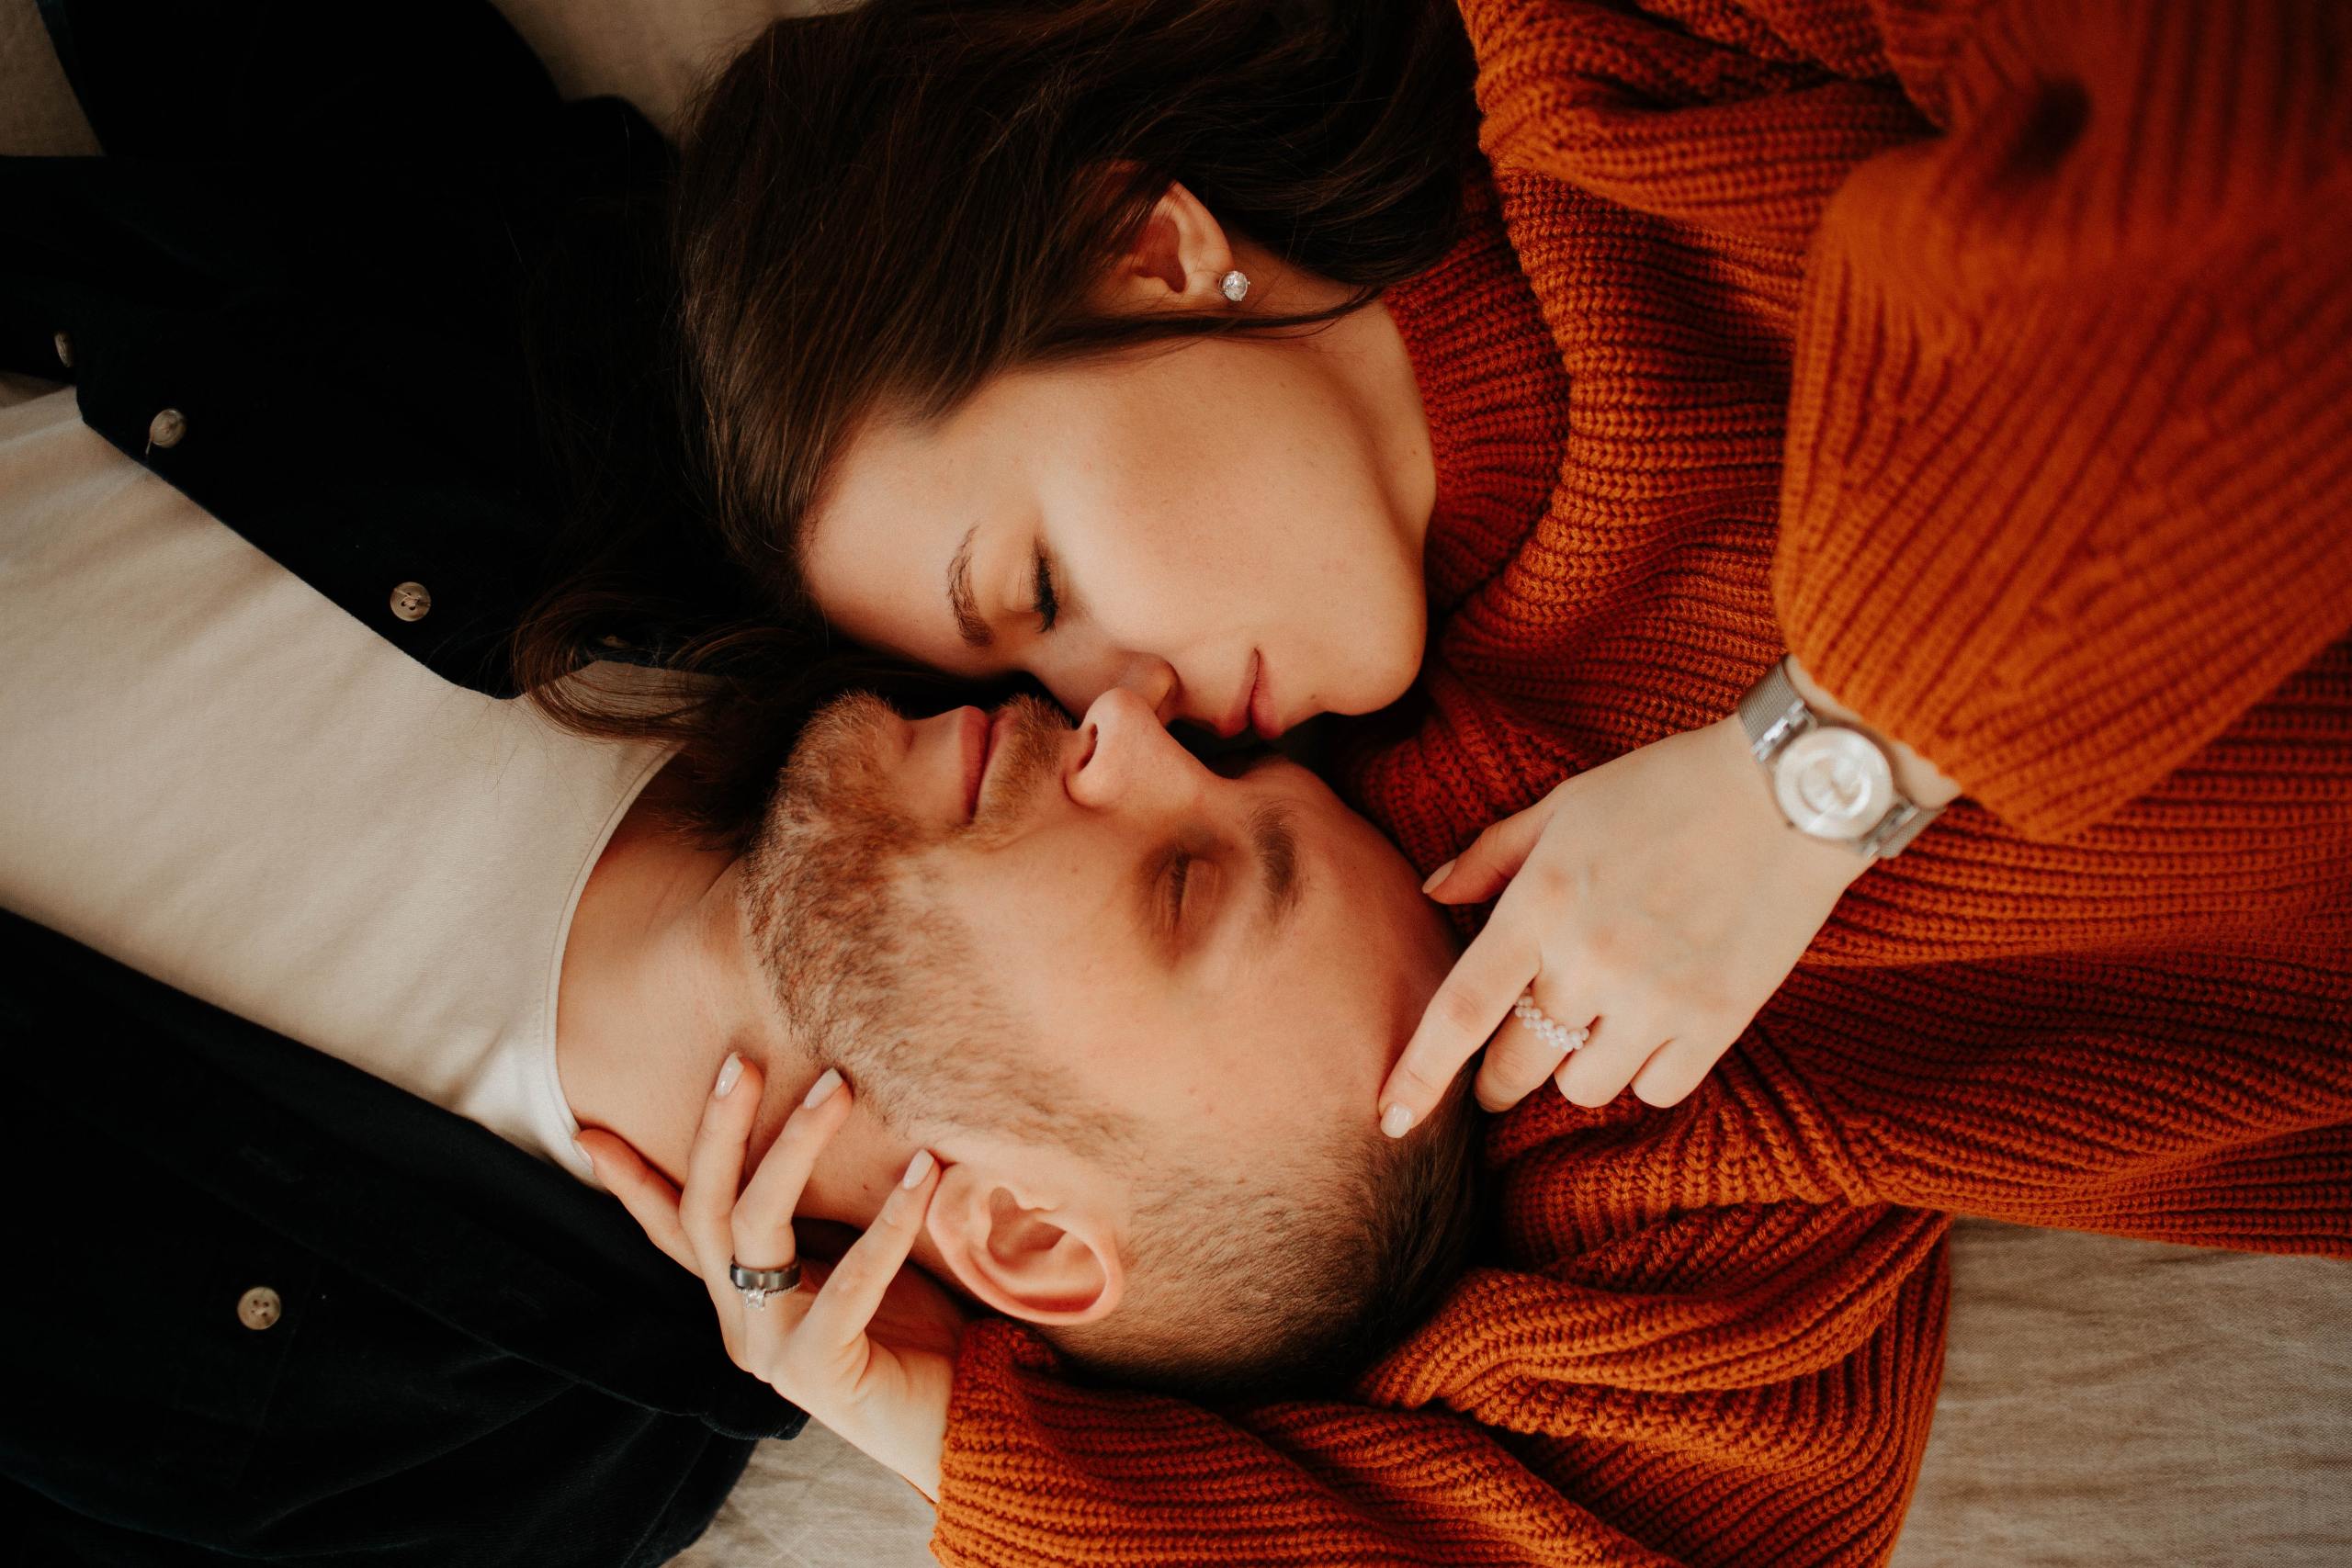 10 PG Ways To Keep The Spark Alive In Your Relationship